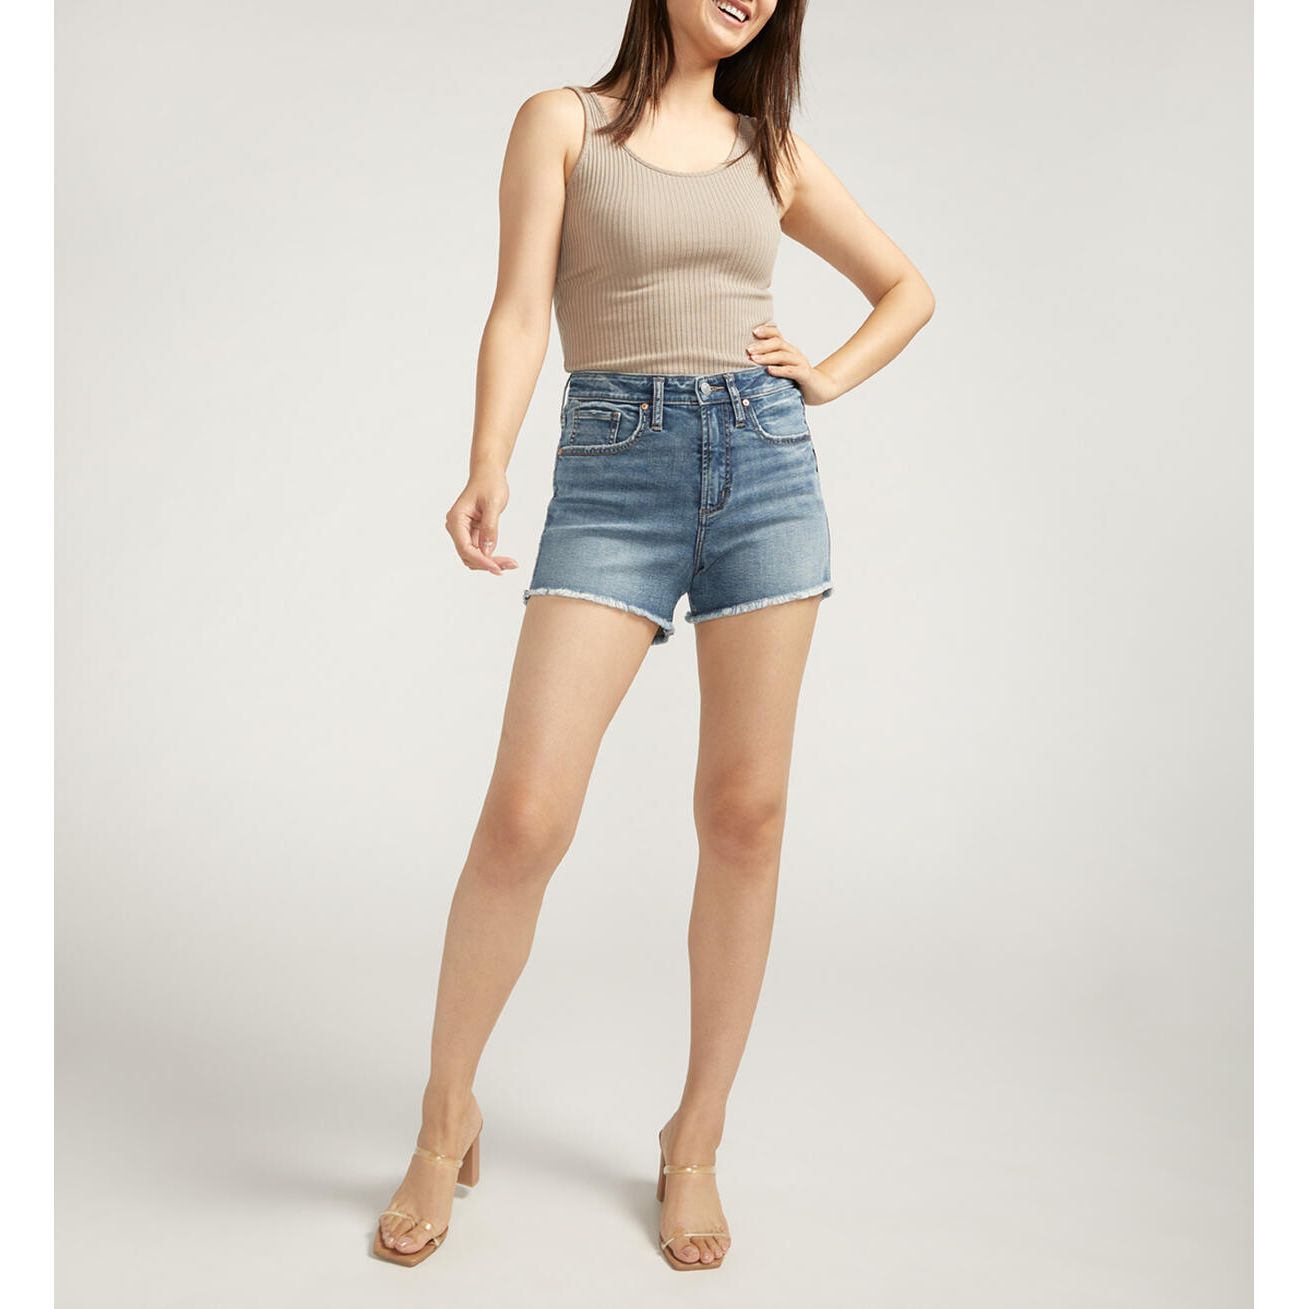 Silver Jeans - Beau High Rise Shorts in L27535CCG307